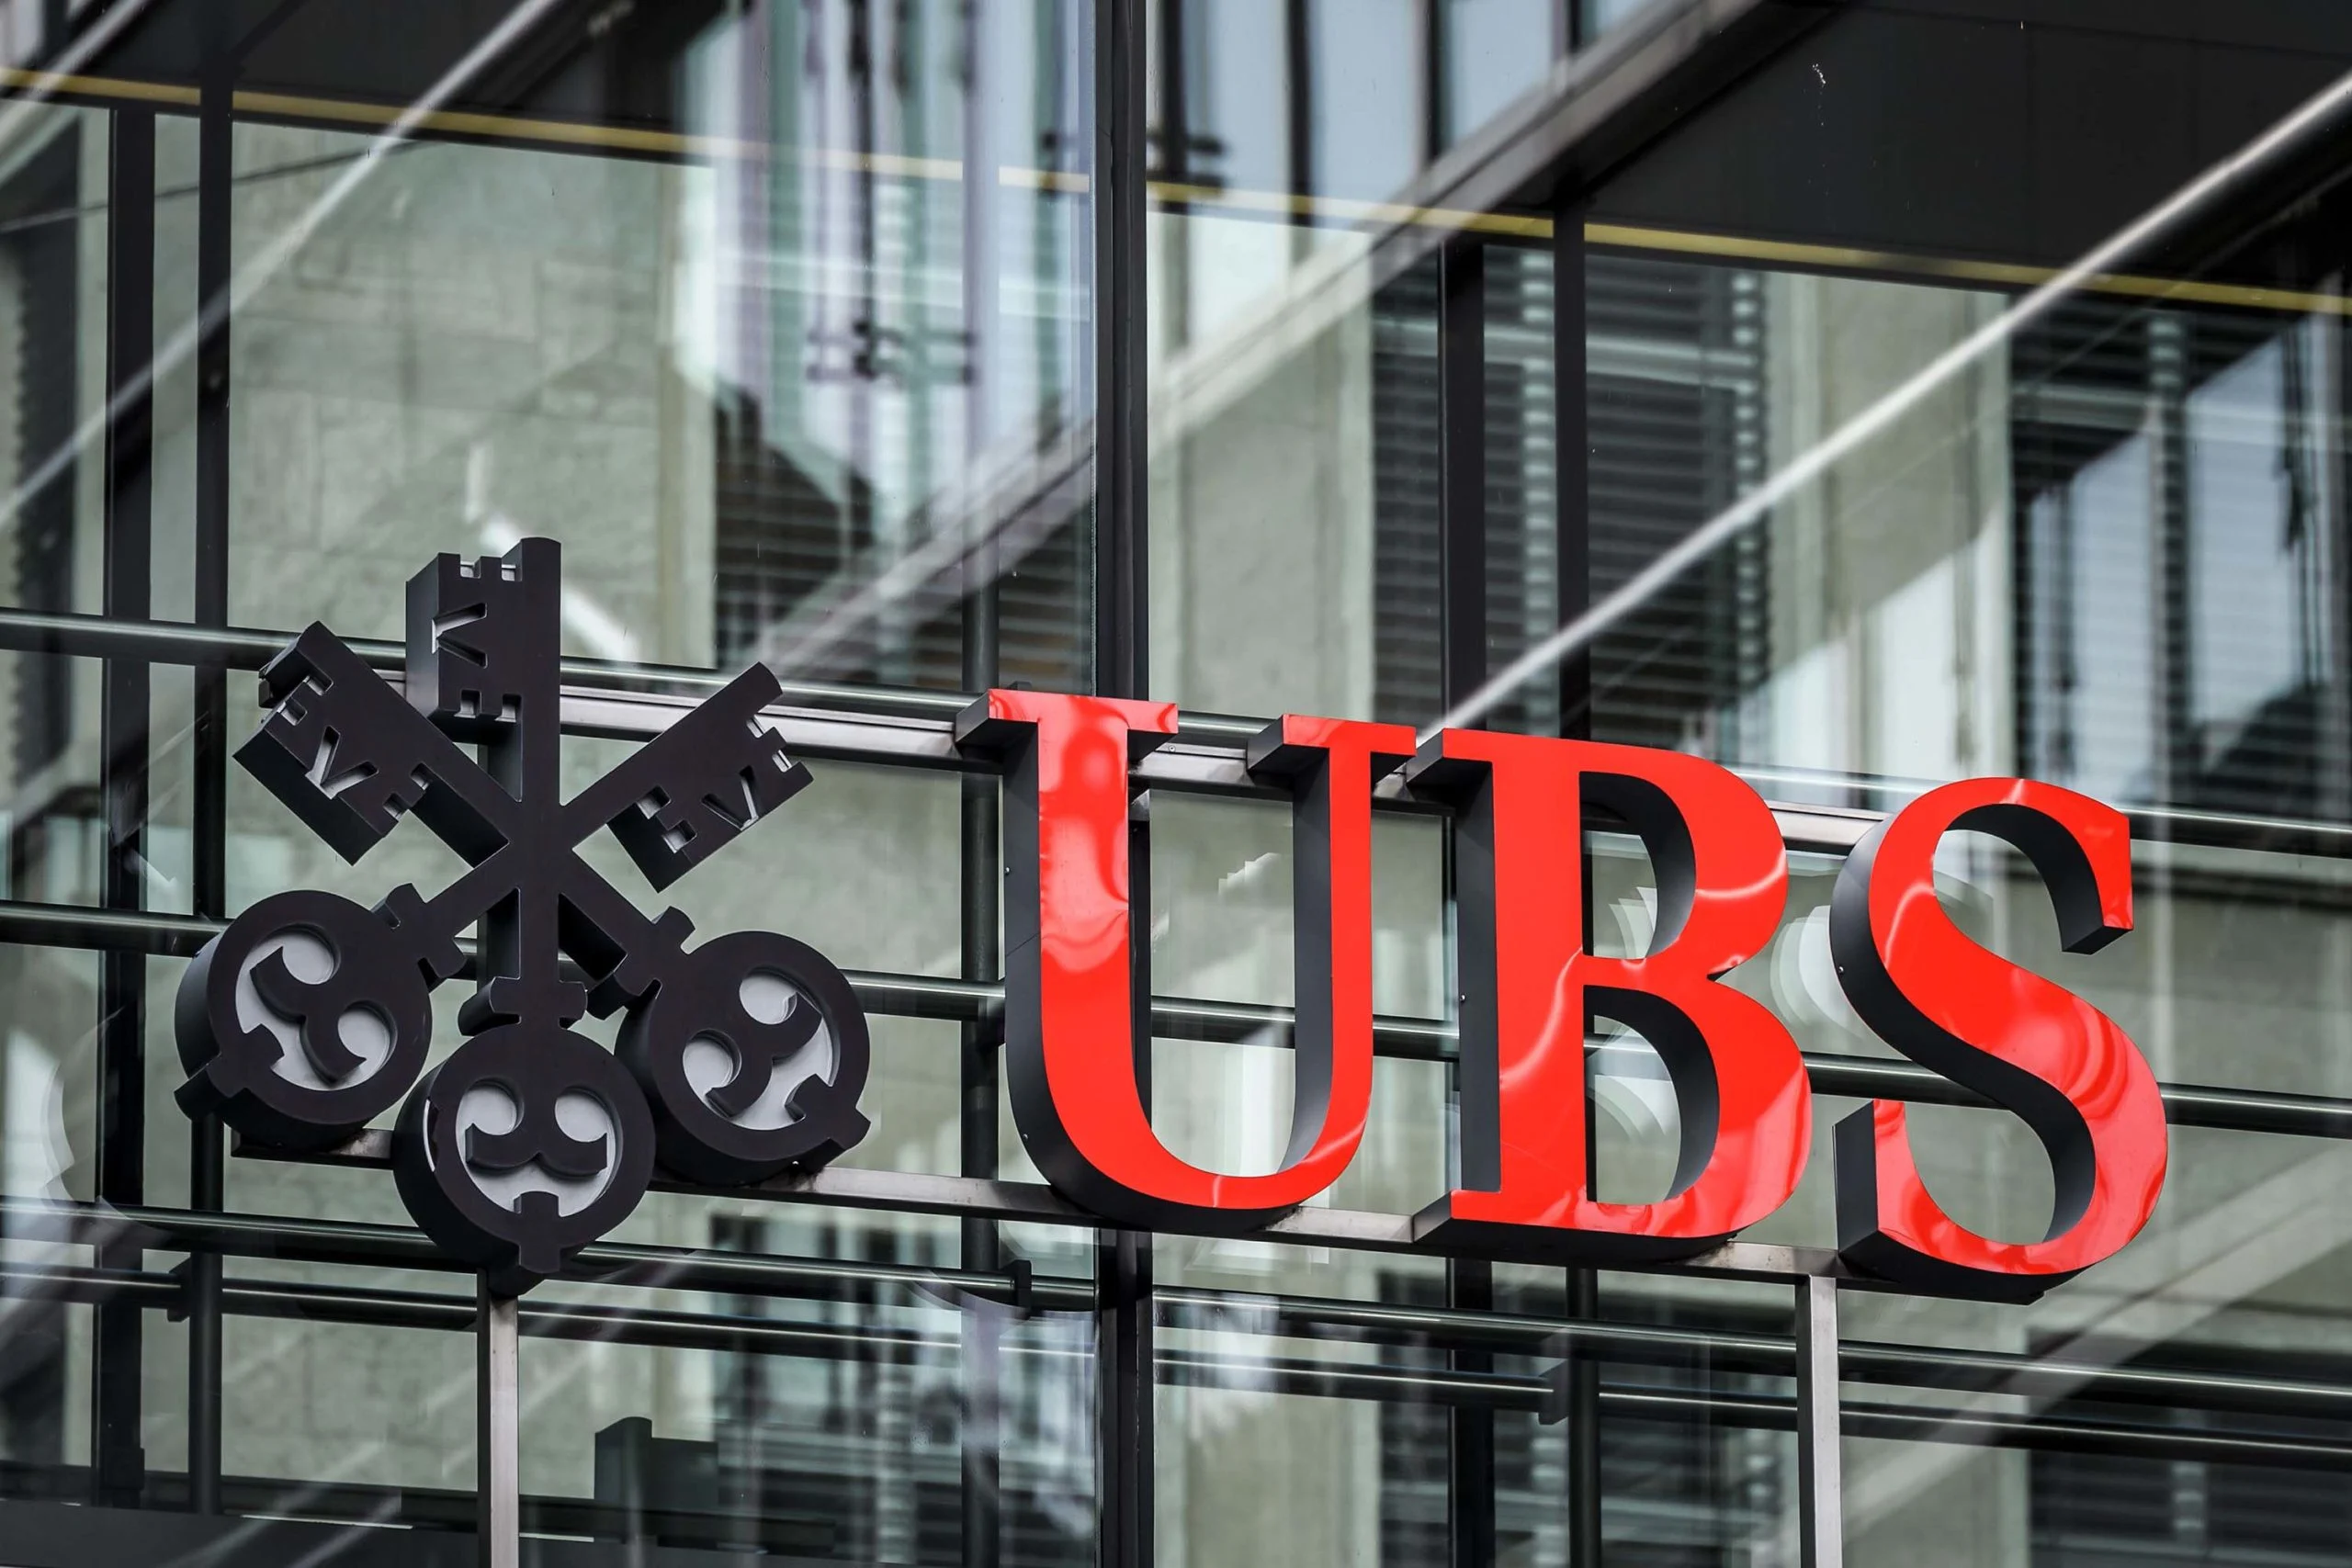 UBS Group